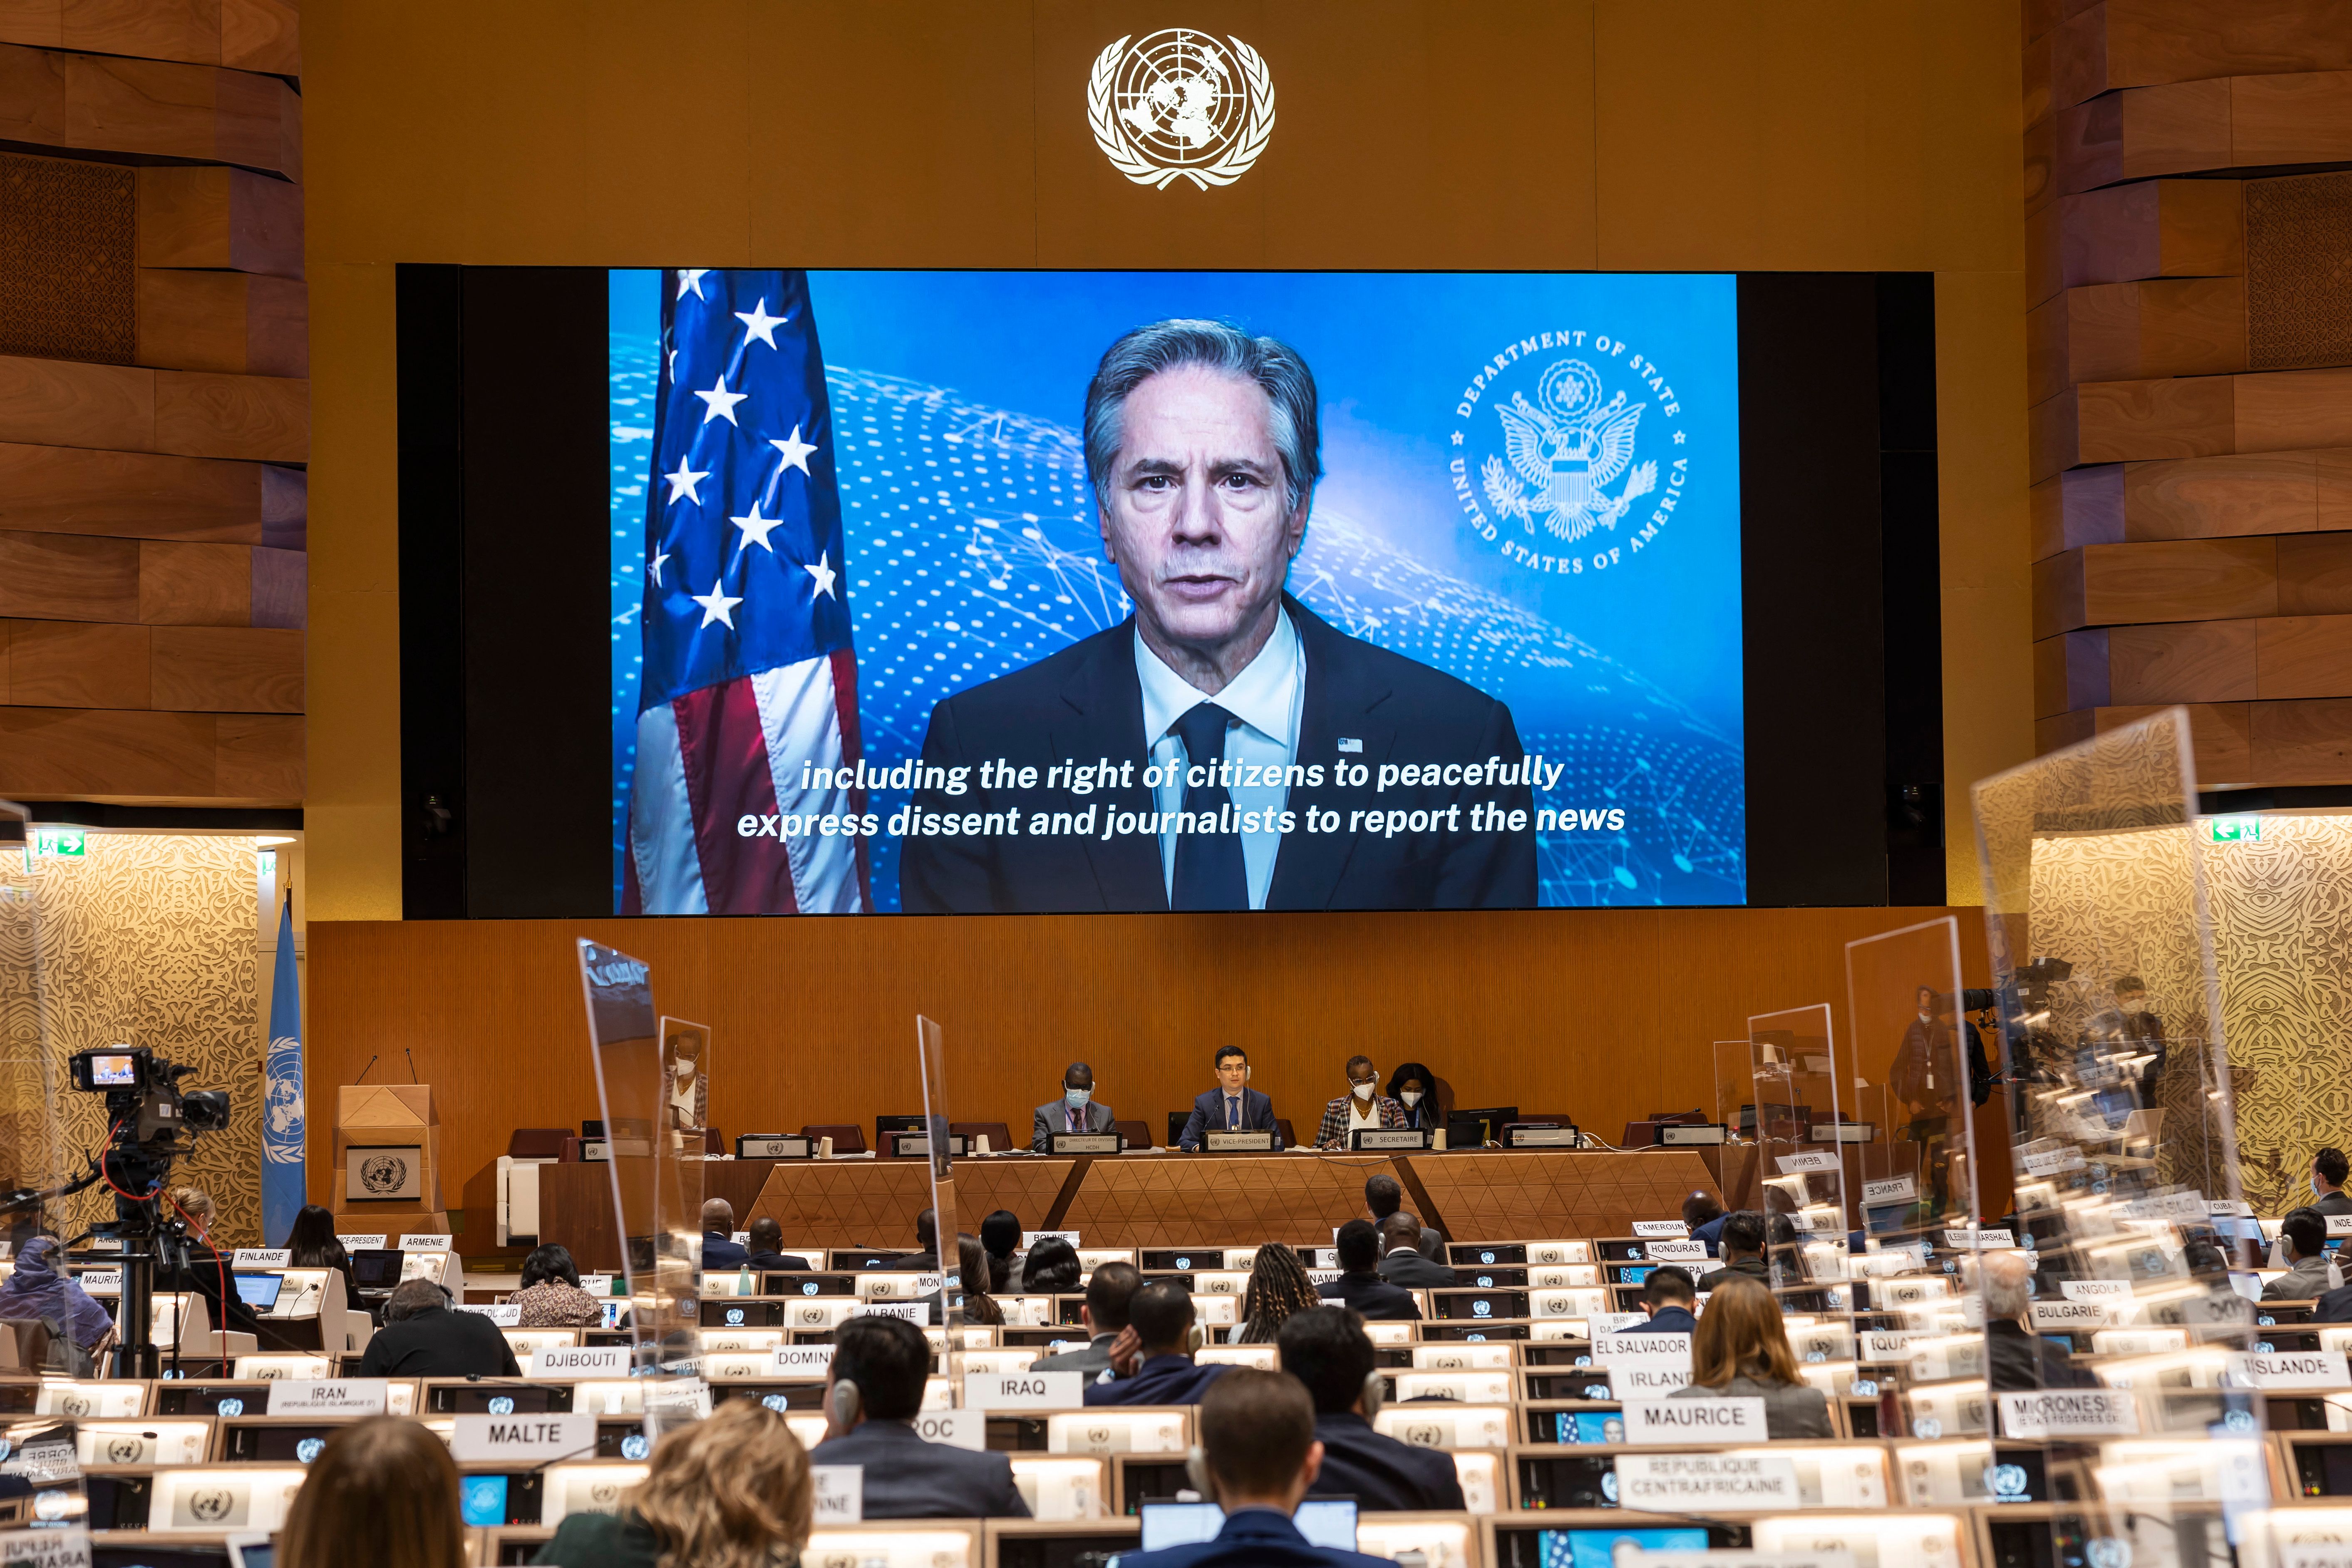 US Secretary of State Antony Blinken appears on a screen as he delivers a remote speech, during the 49th session of the UN Human Rights Council at the European headquarters of the United Nations in Geneva, Switzerland, on March 1.